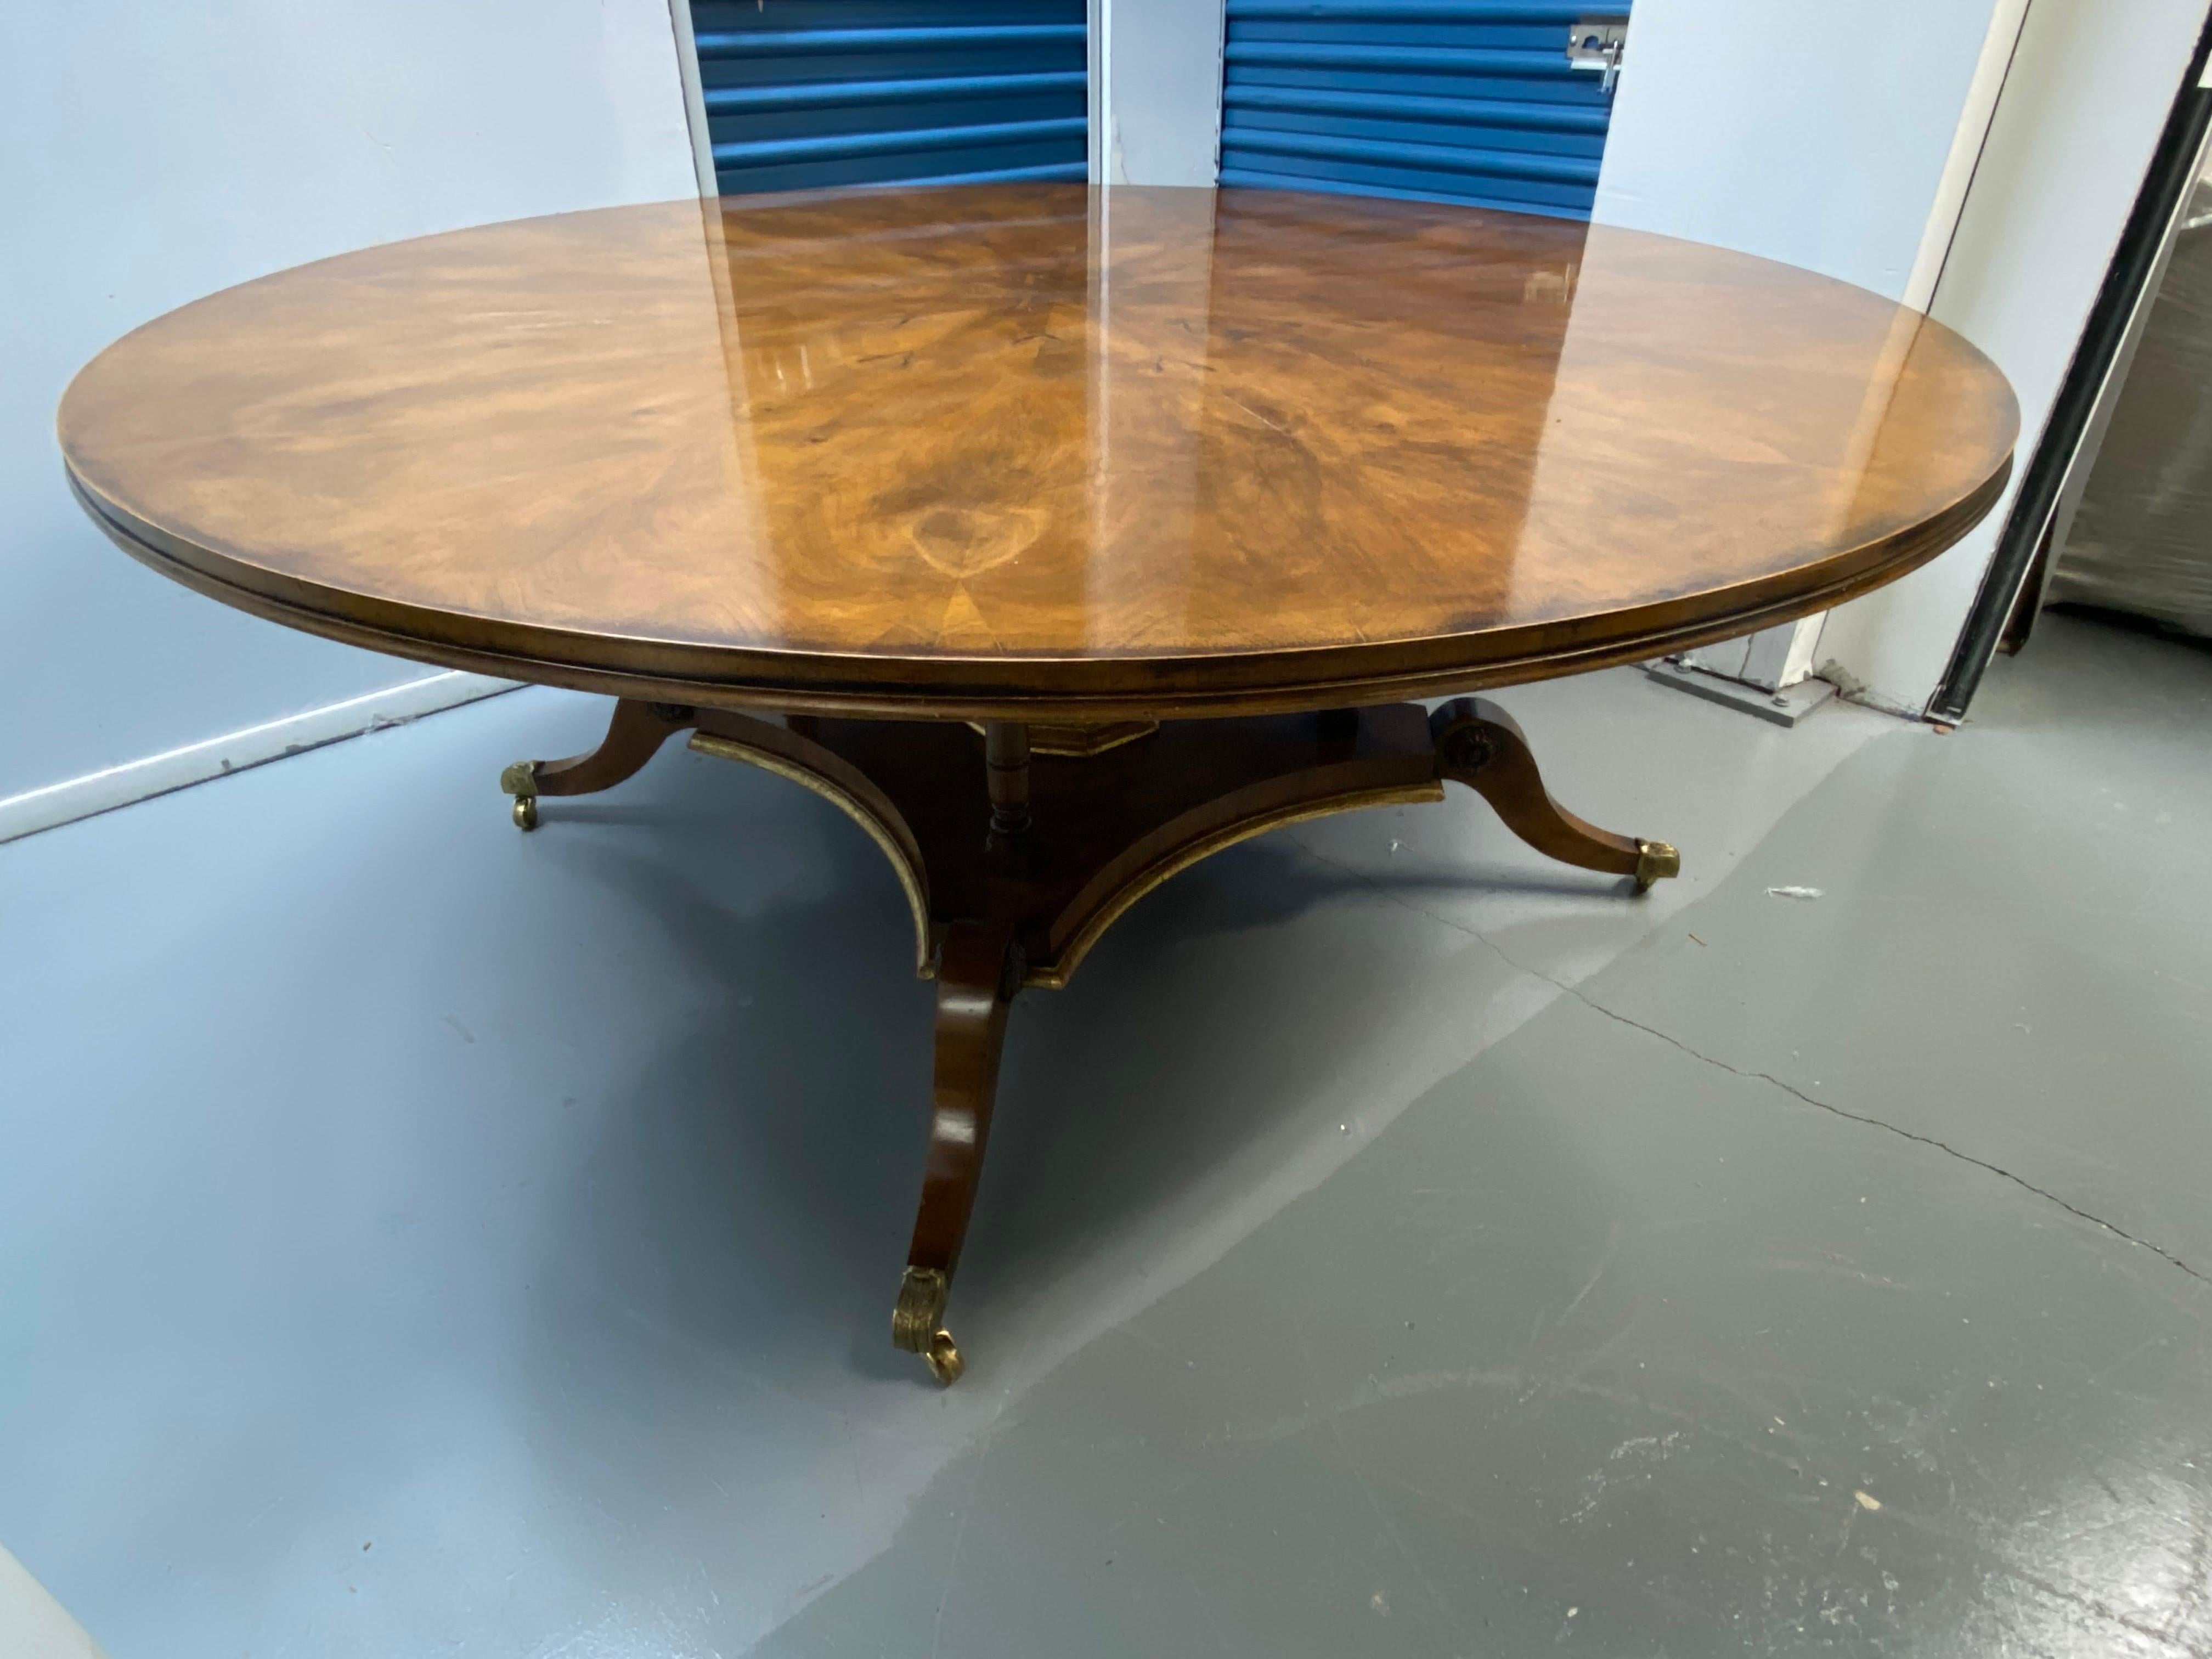 Georgian Style Large Round Starburst Matched Pedestal Table In Good Condition For Sale In Southampton, NY